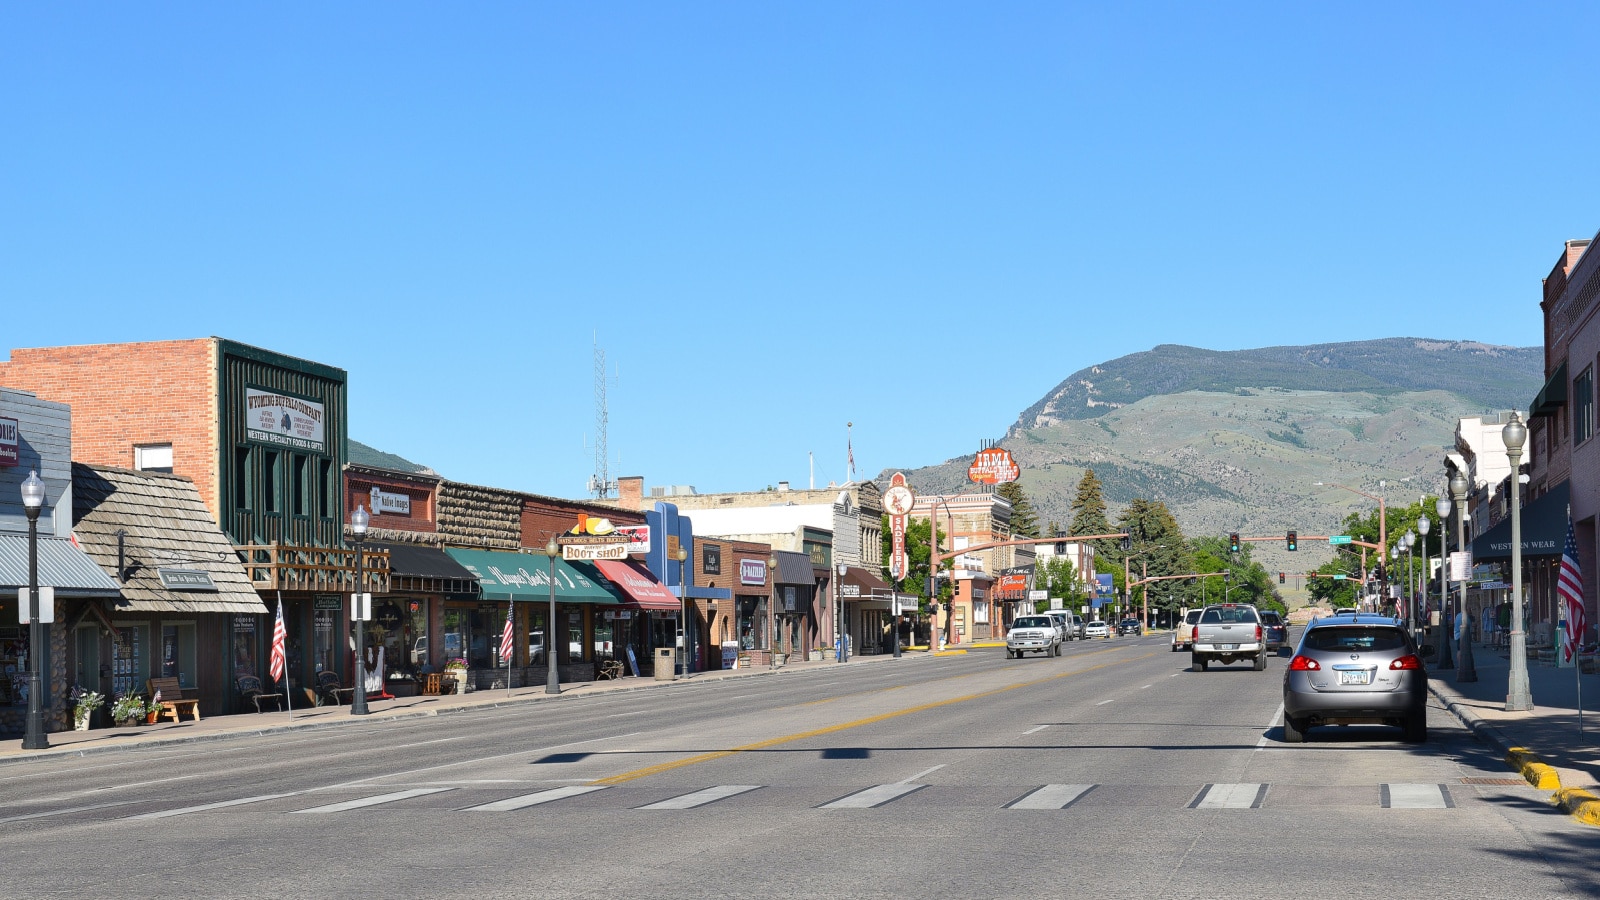 CODY, WYOMING - JUNE 24, 2017: Sheridan Avenue in Cody, Wyoming. The street is the main business and tourist route in the famous western town.